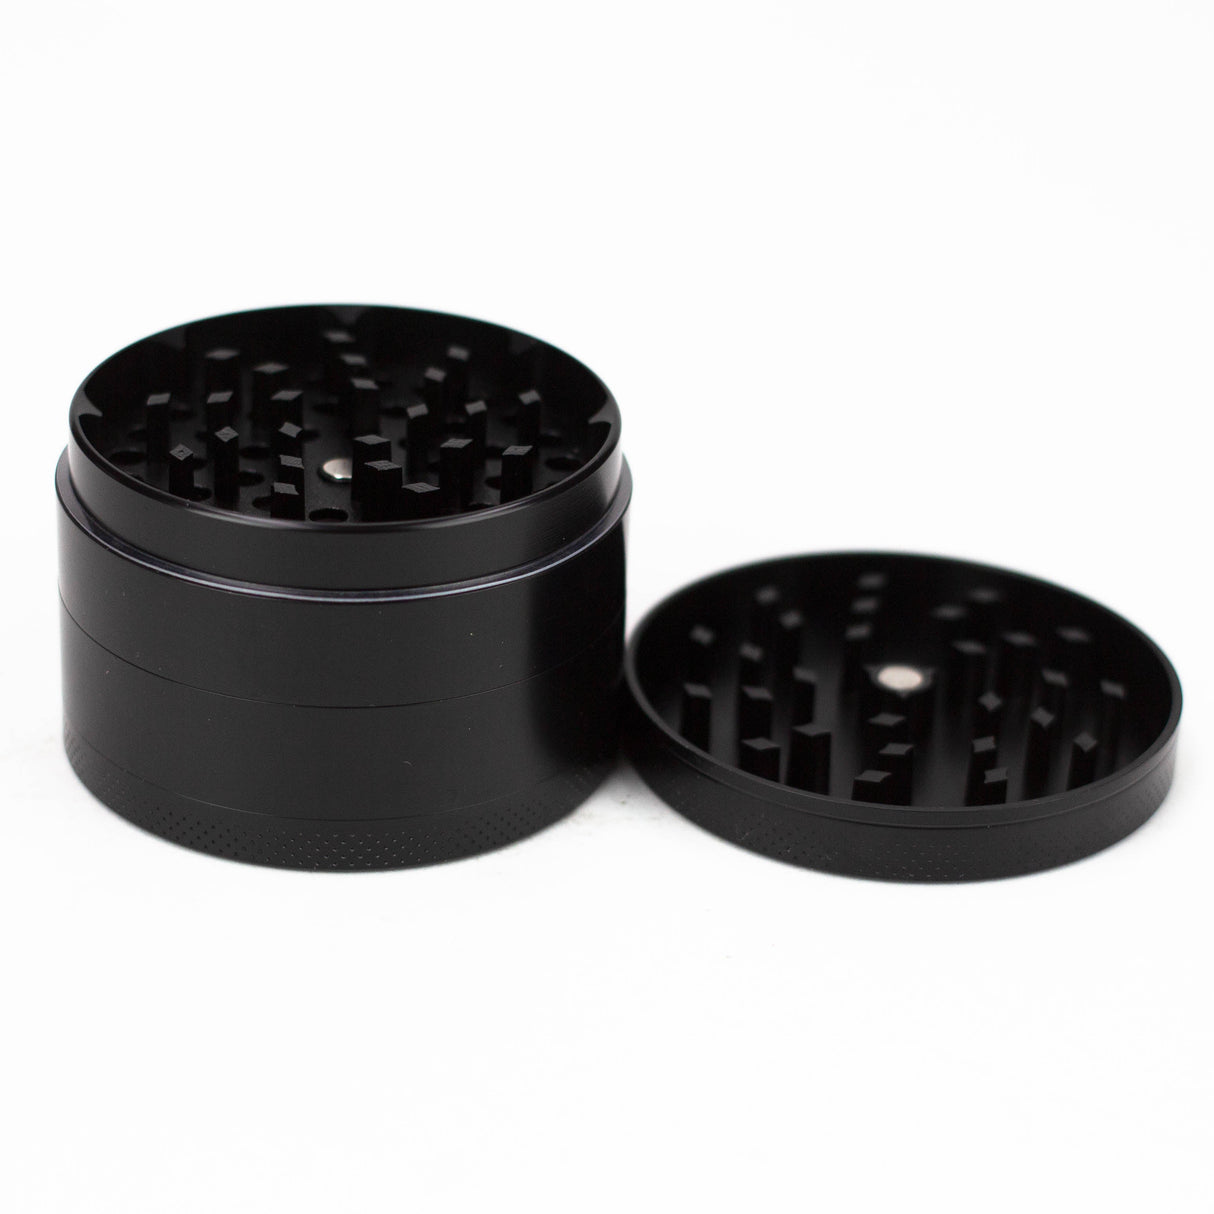 4 Parts Spice Herb Grinder Assorted Box of 6